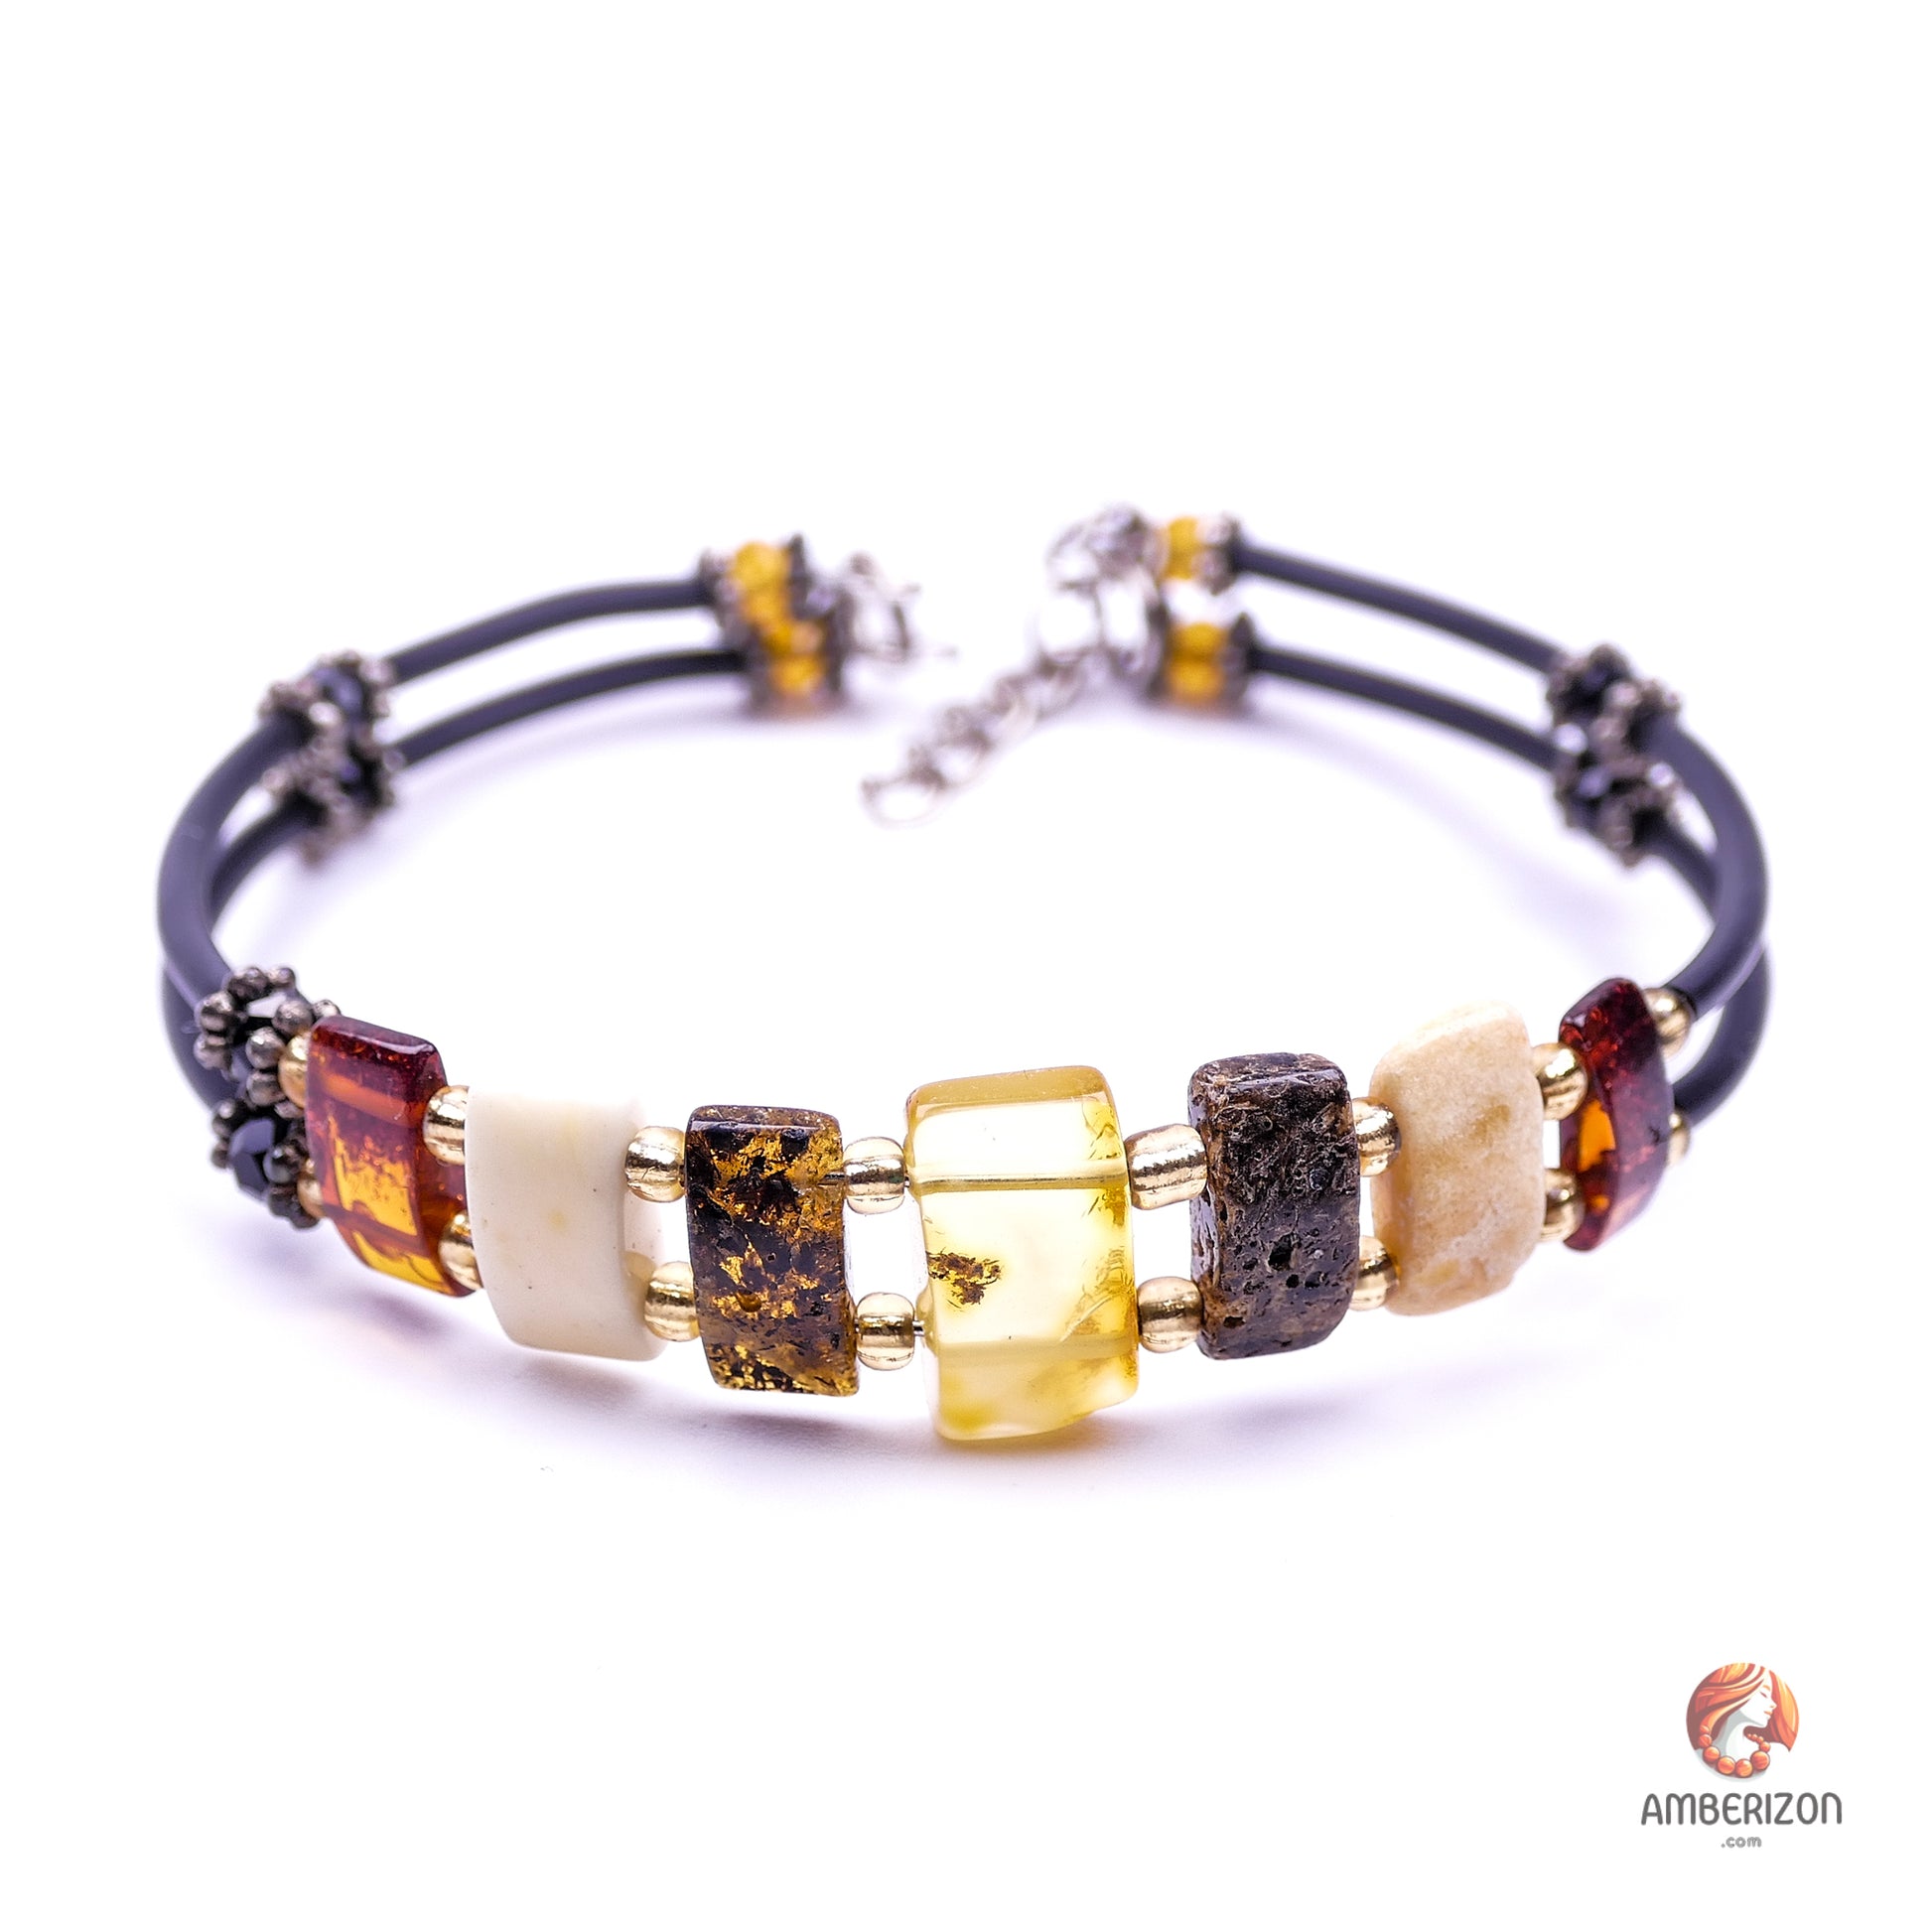 Wire Baltic amber bracelet - Multicolored polished beads